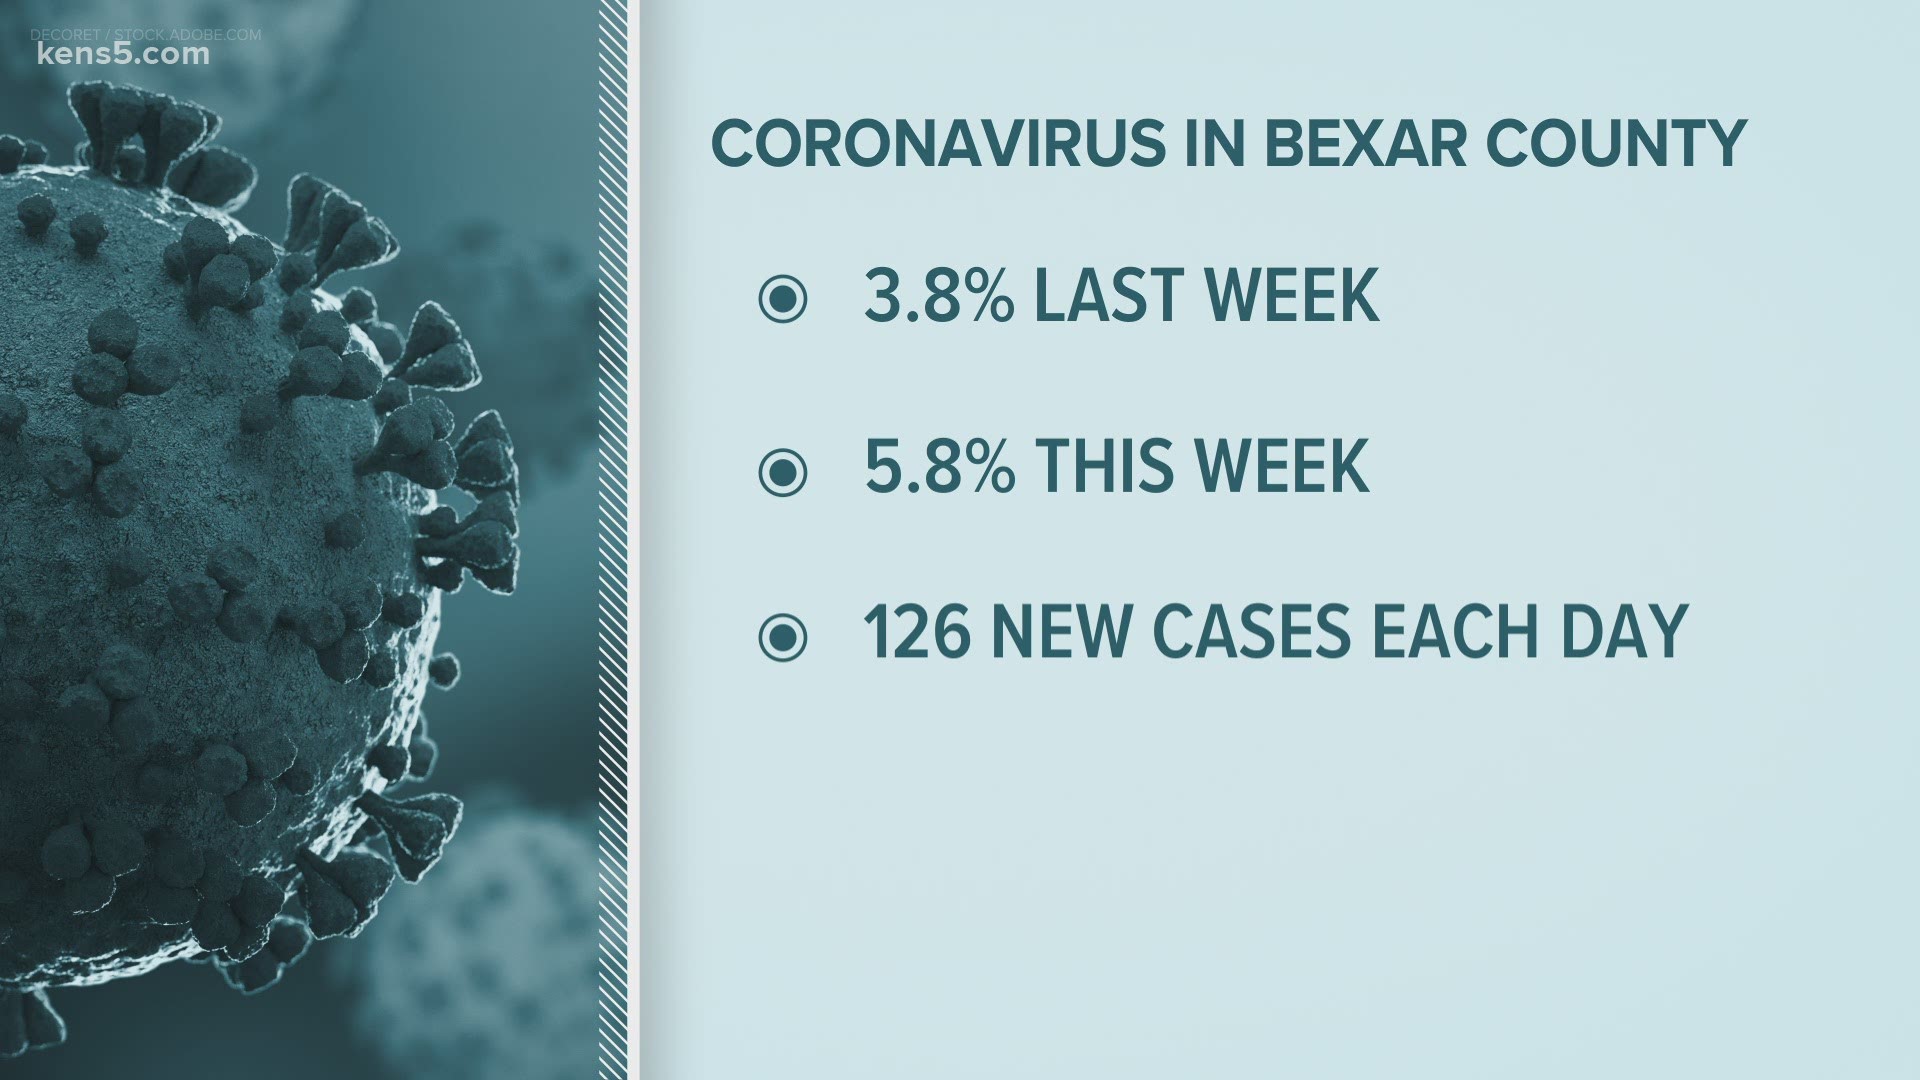 The coronavirus positivity rate is up to 5.8% this week, from 3.8% last week.